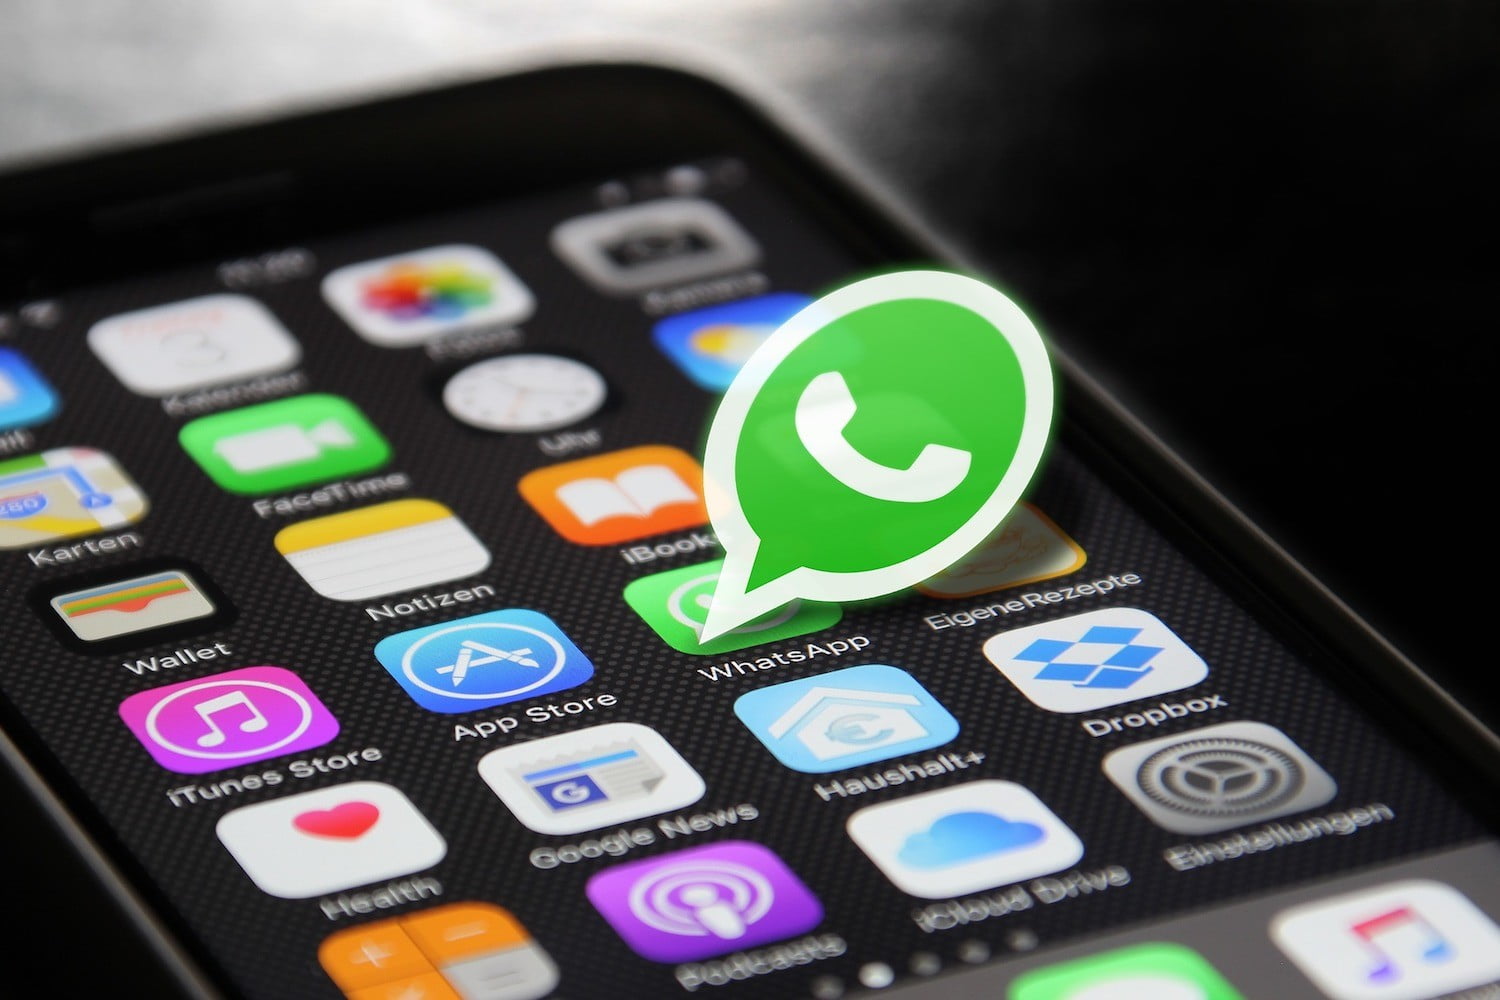 WhatsApp came in multiple device mode on the iPhone